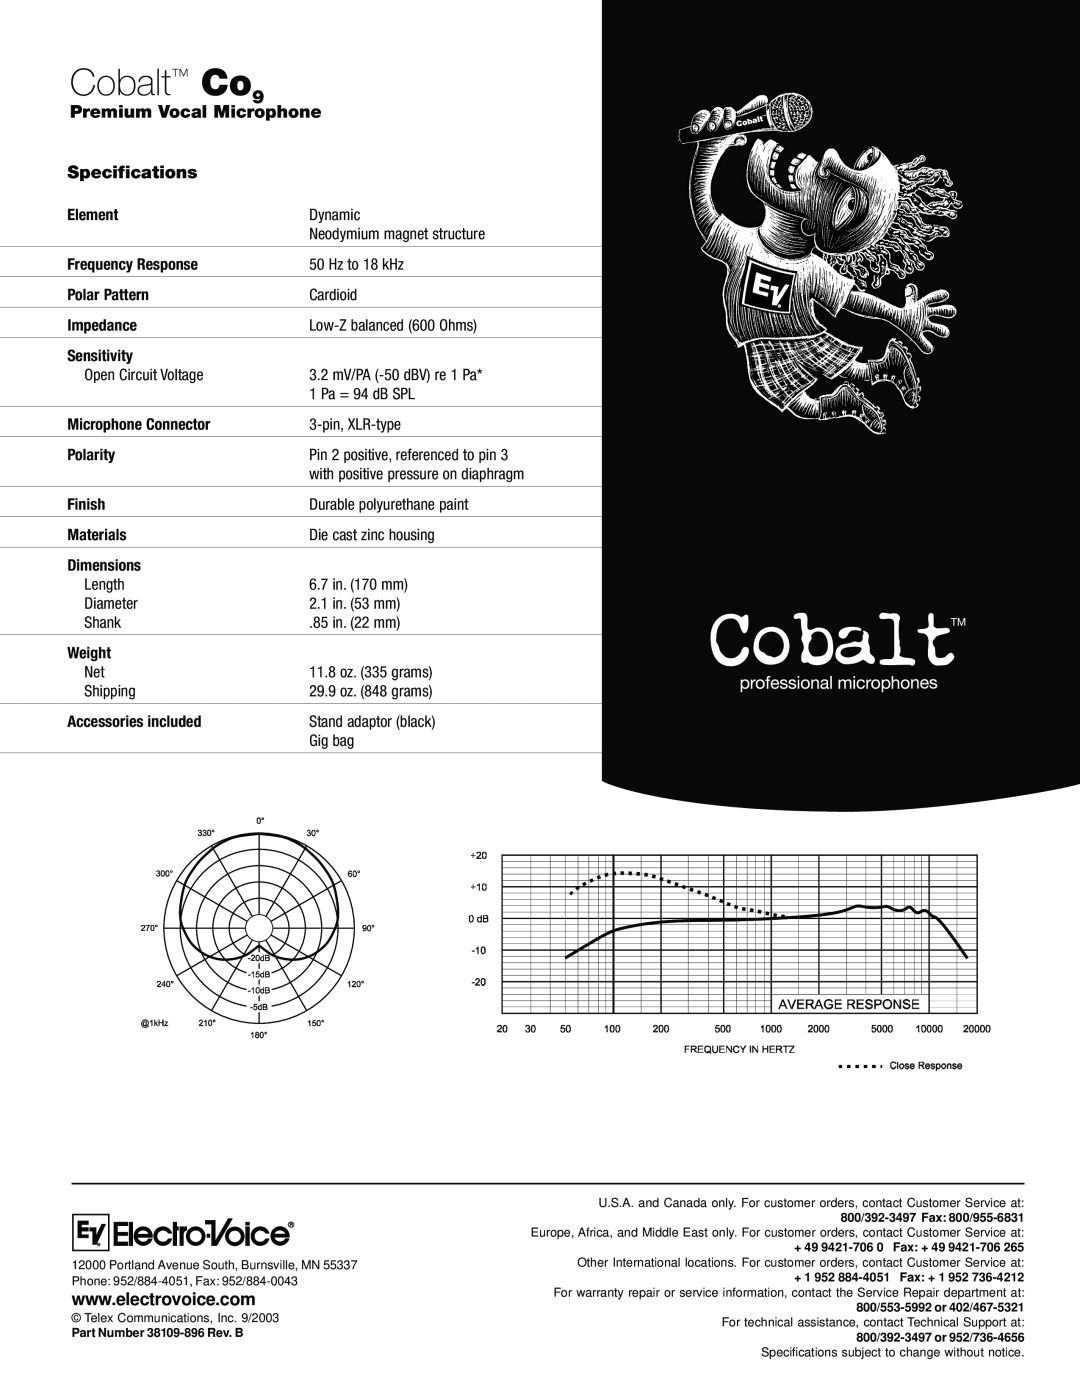 Electro-Voice Cobalt Co9 manual Premium Vocal Microphone Specifications 